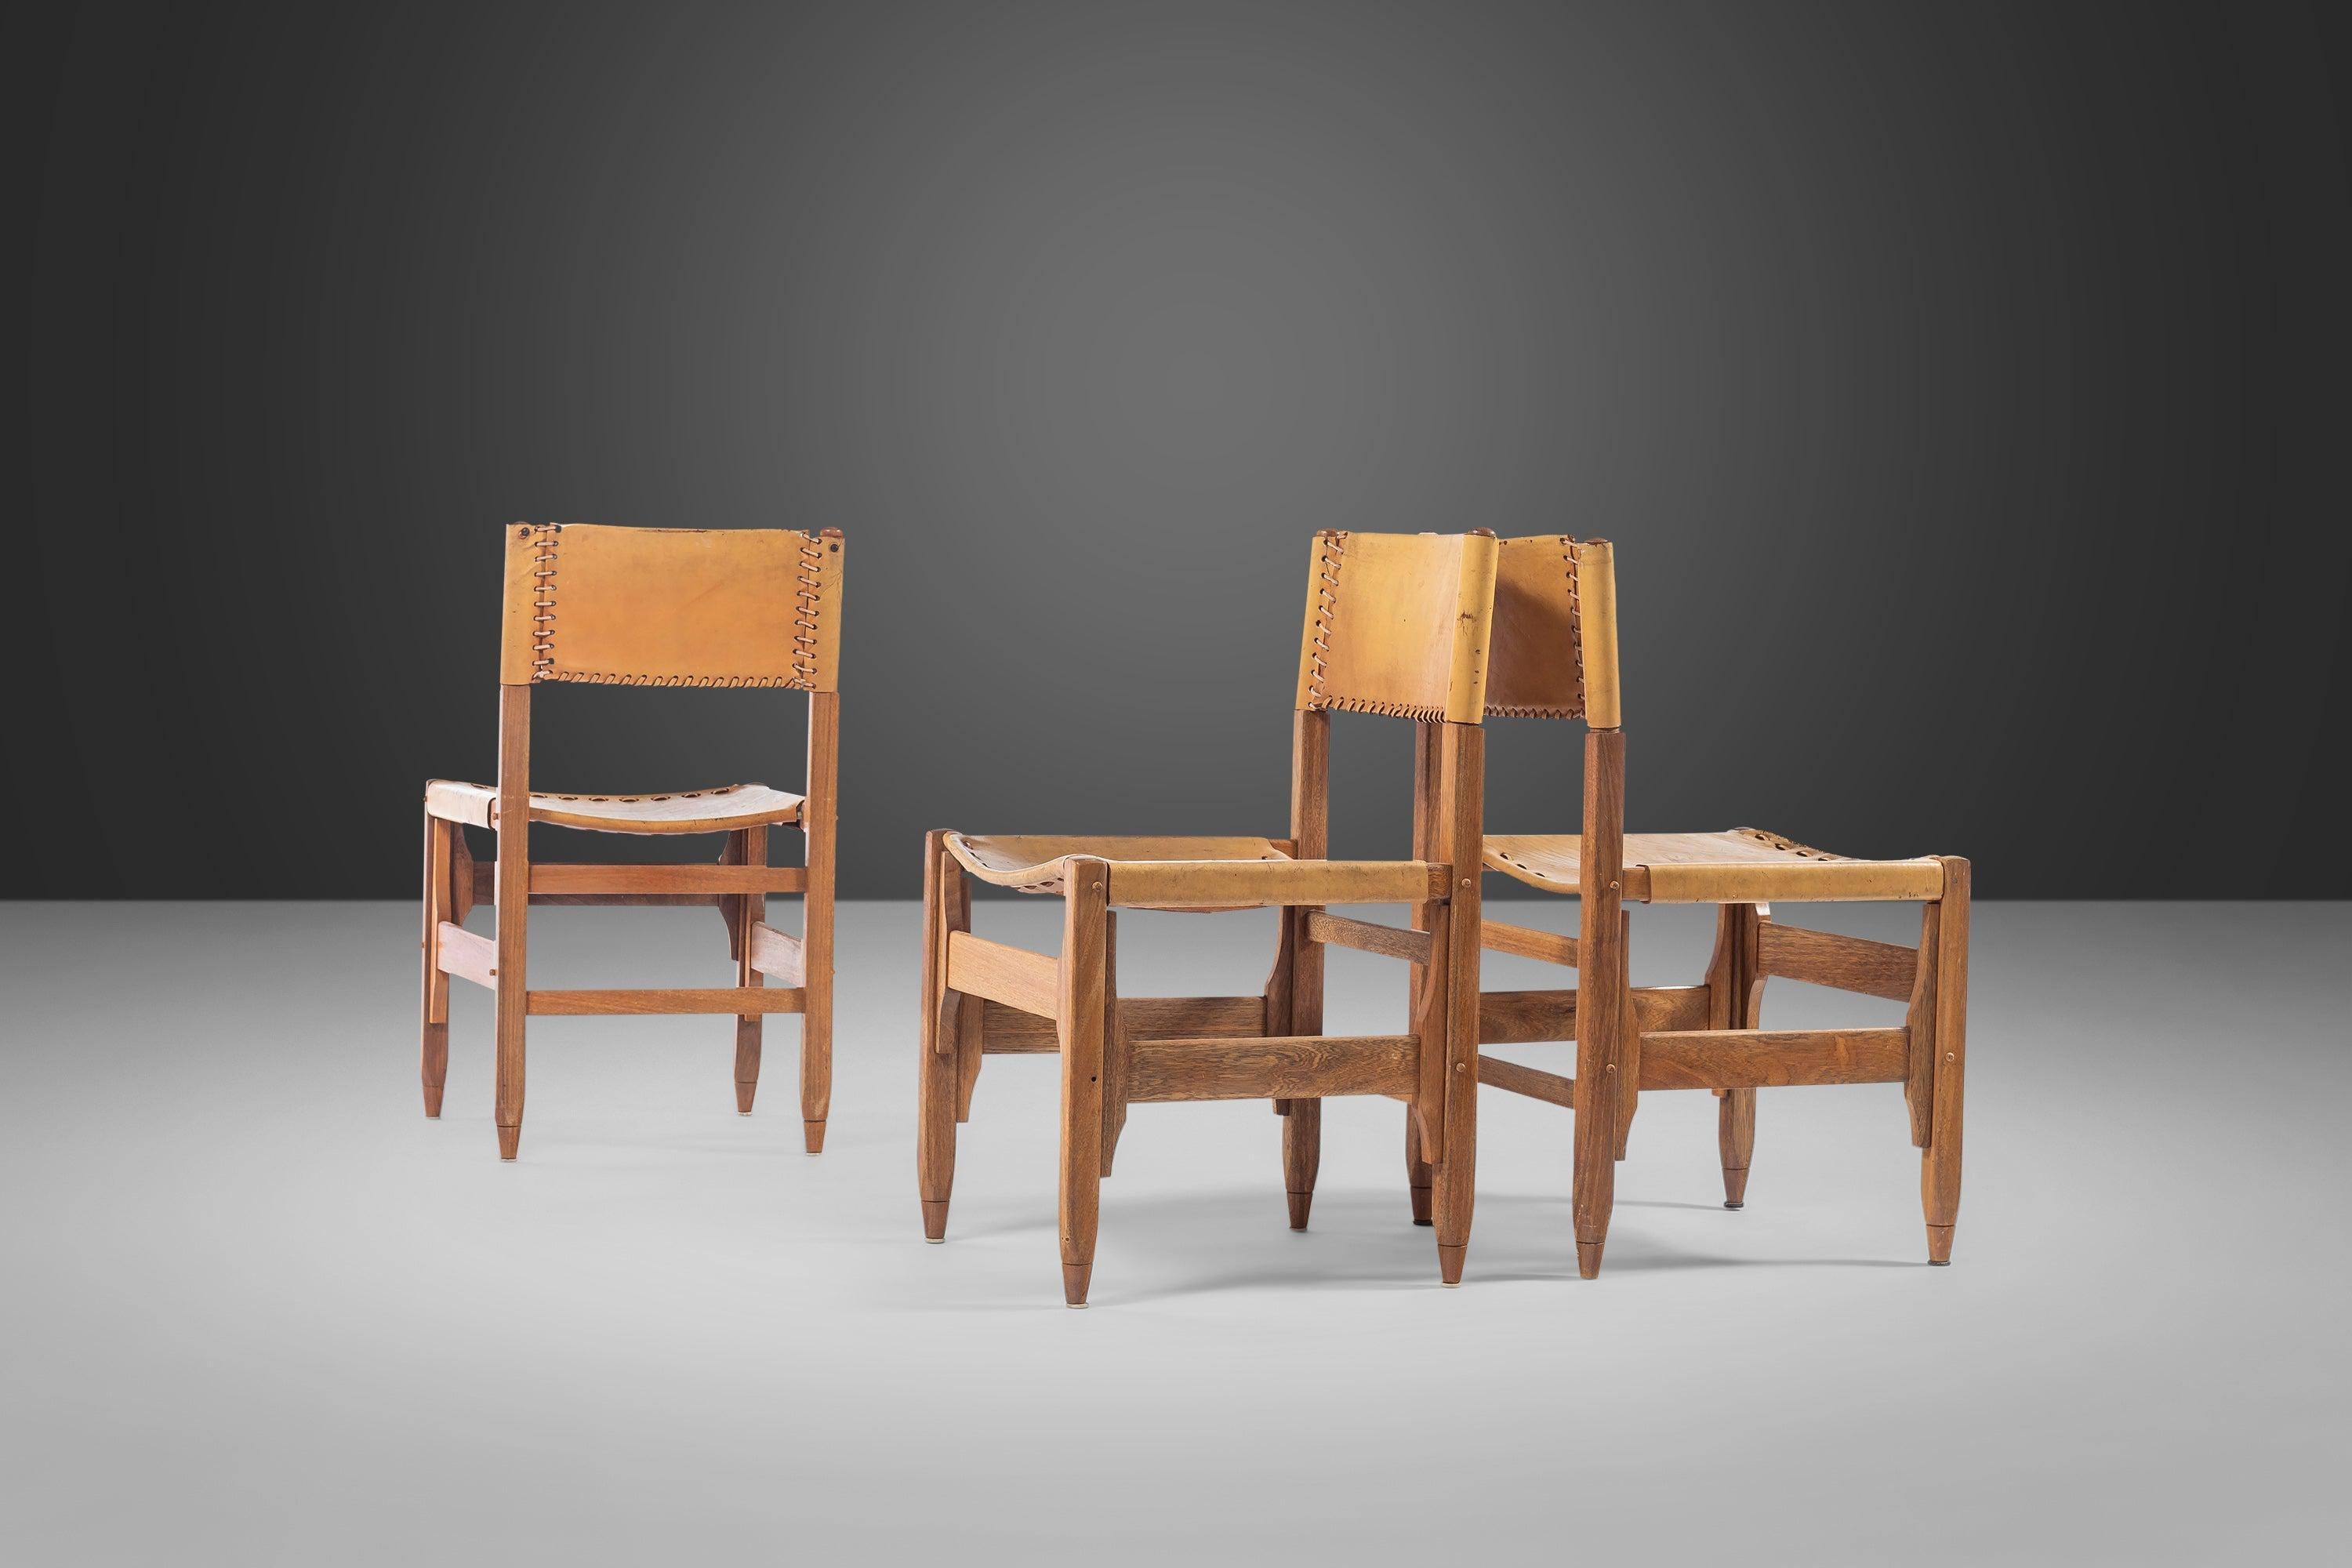 Tanned Saddle Leather Side Chair Designed by Biermann Werner for Arte Sano, 1960 For Sale 7